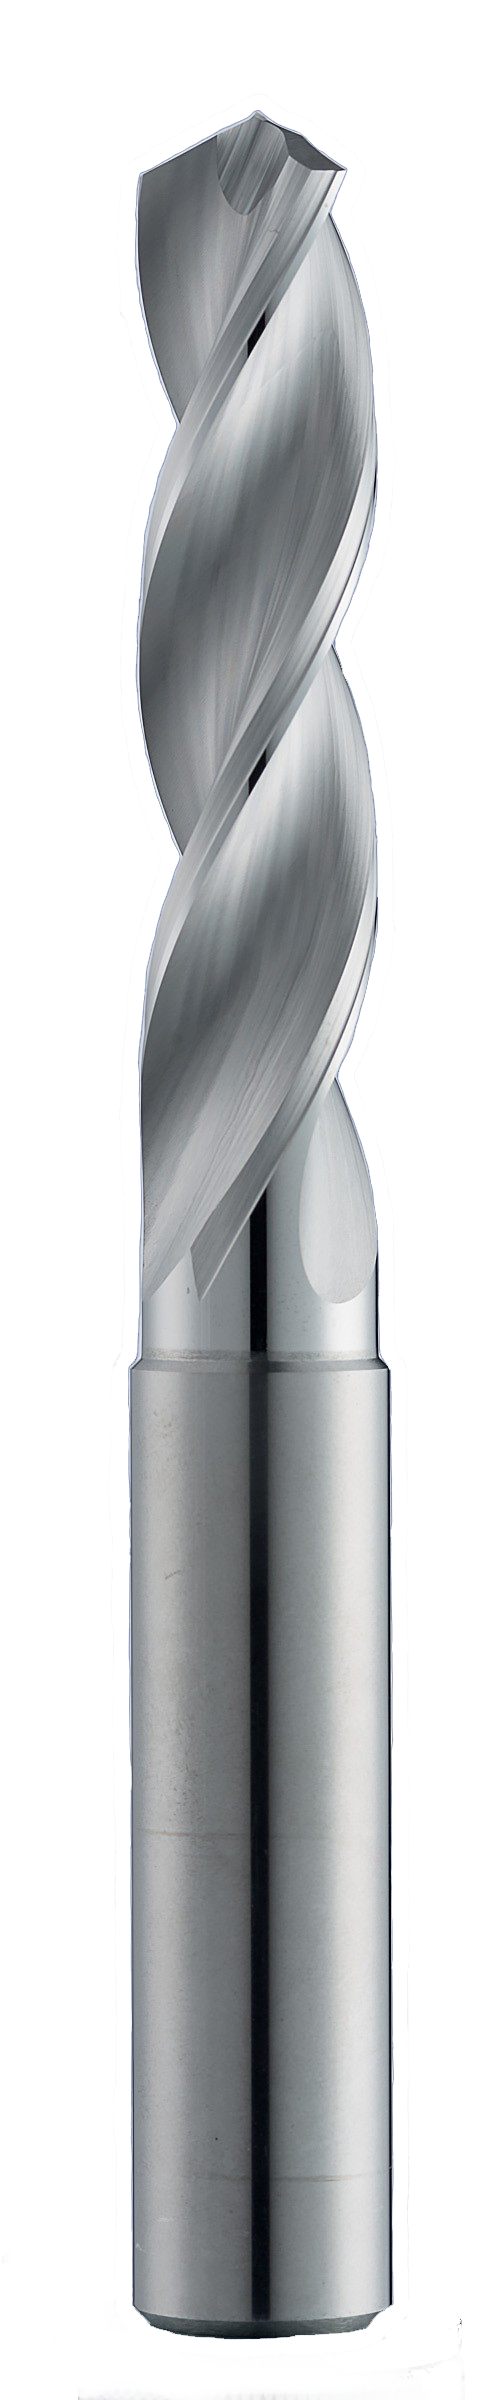 13.00mm Dia, 124 Degree Point, Solid Carbide Drill - 64693